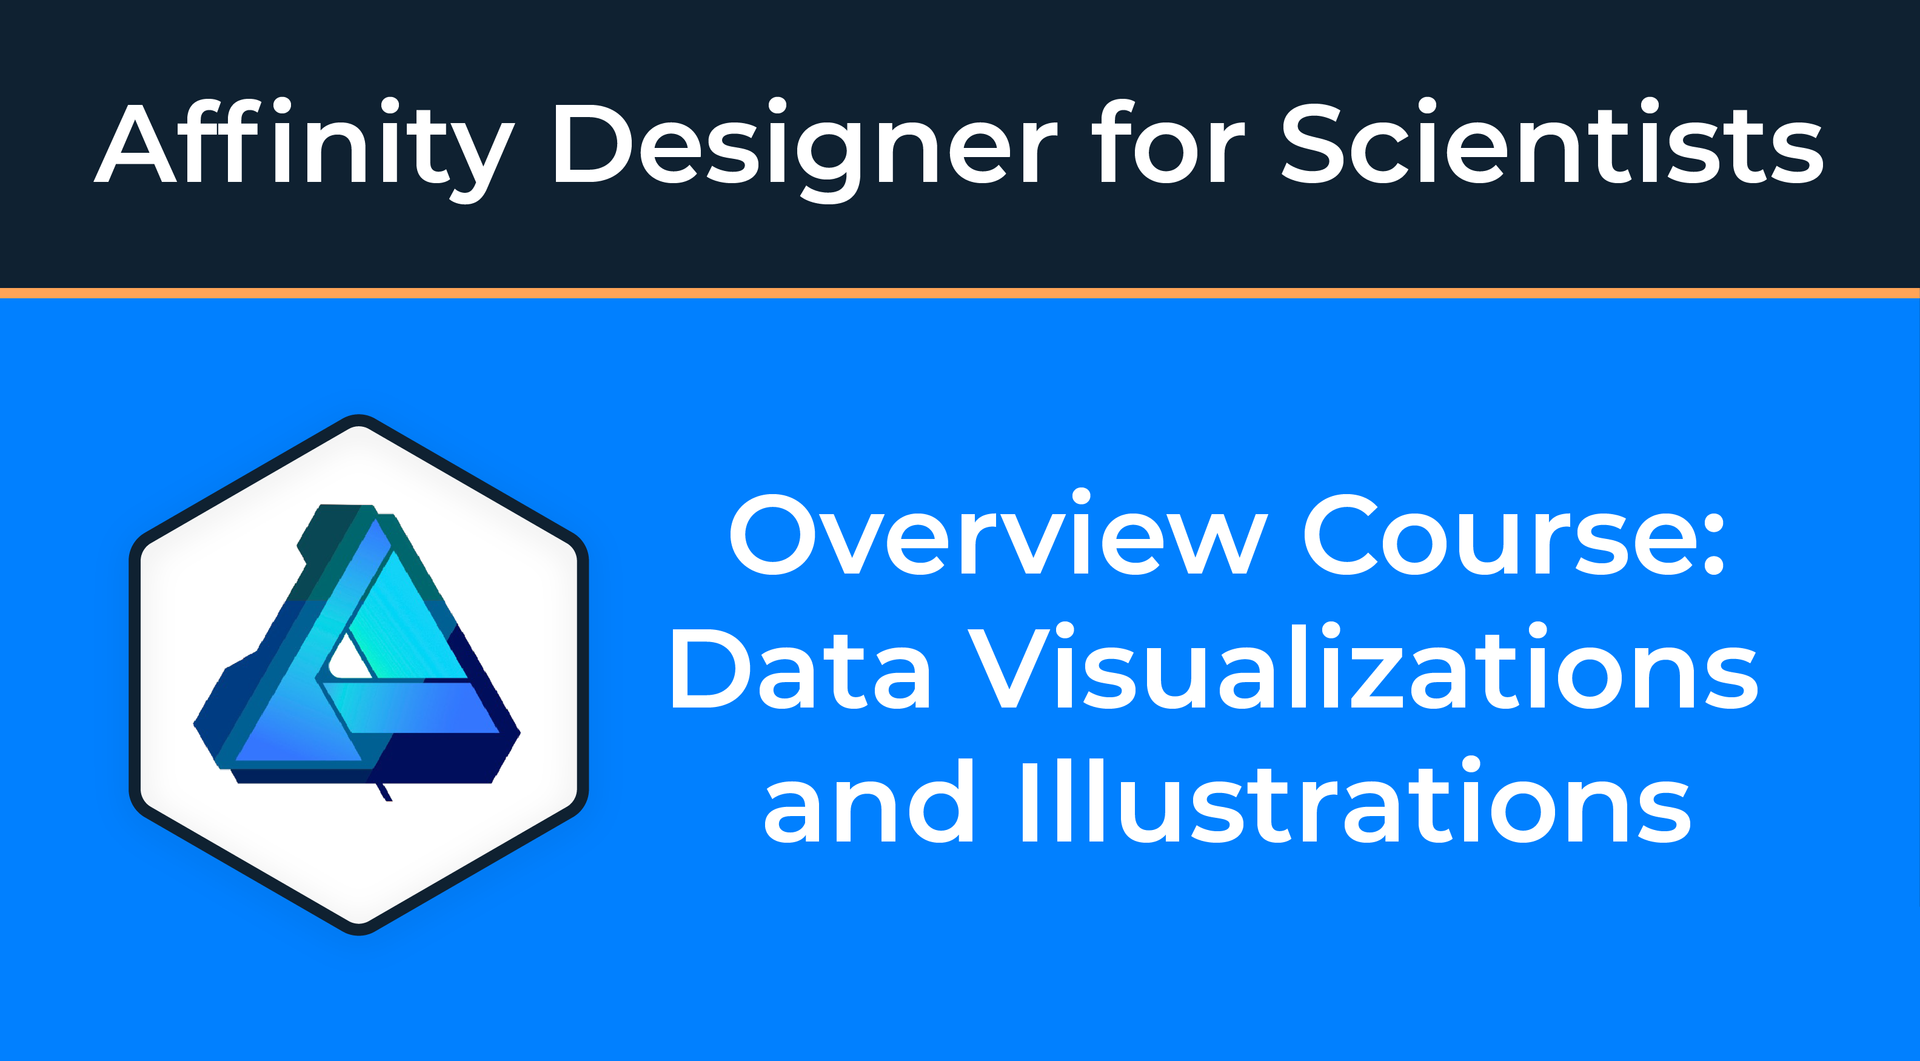 Affinity Designer online course for scientific illustrations and data visualizations